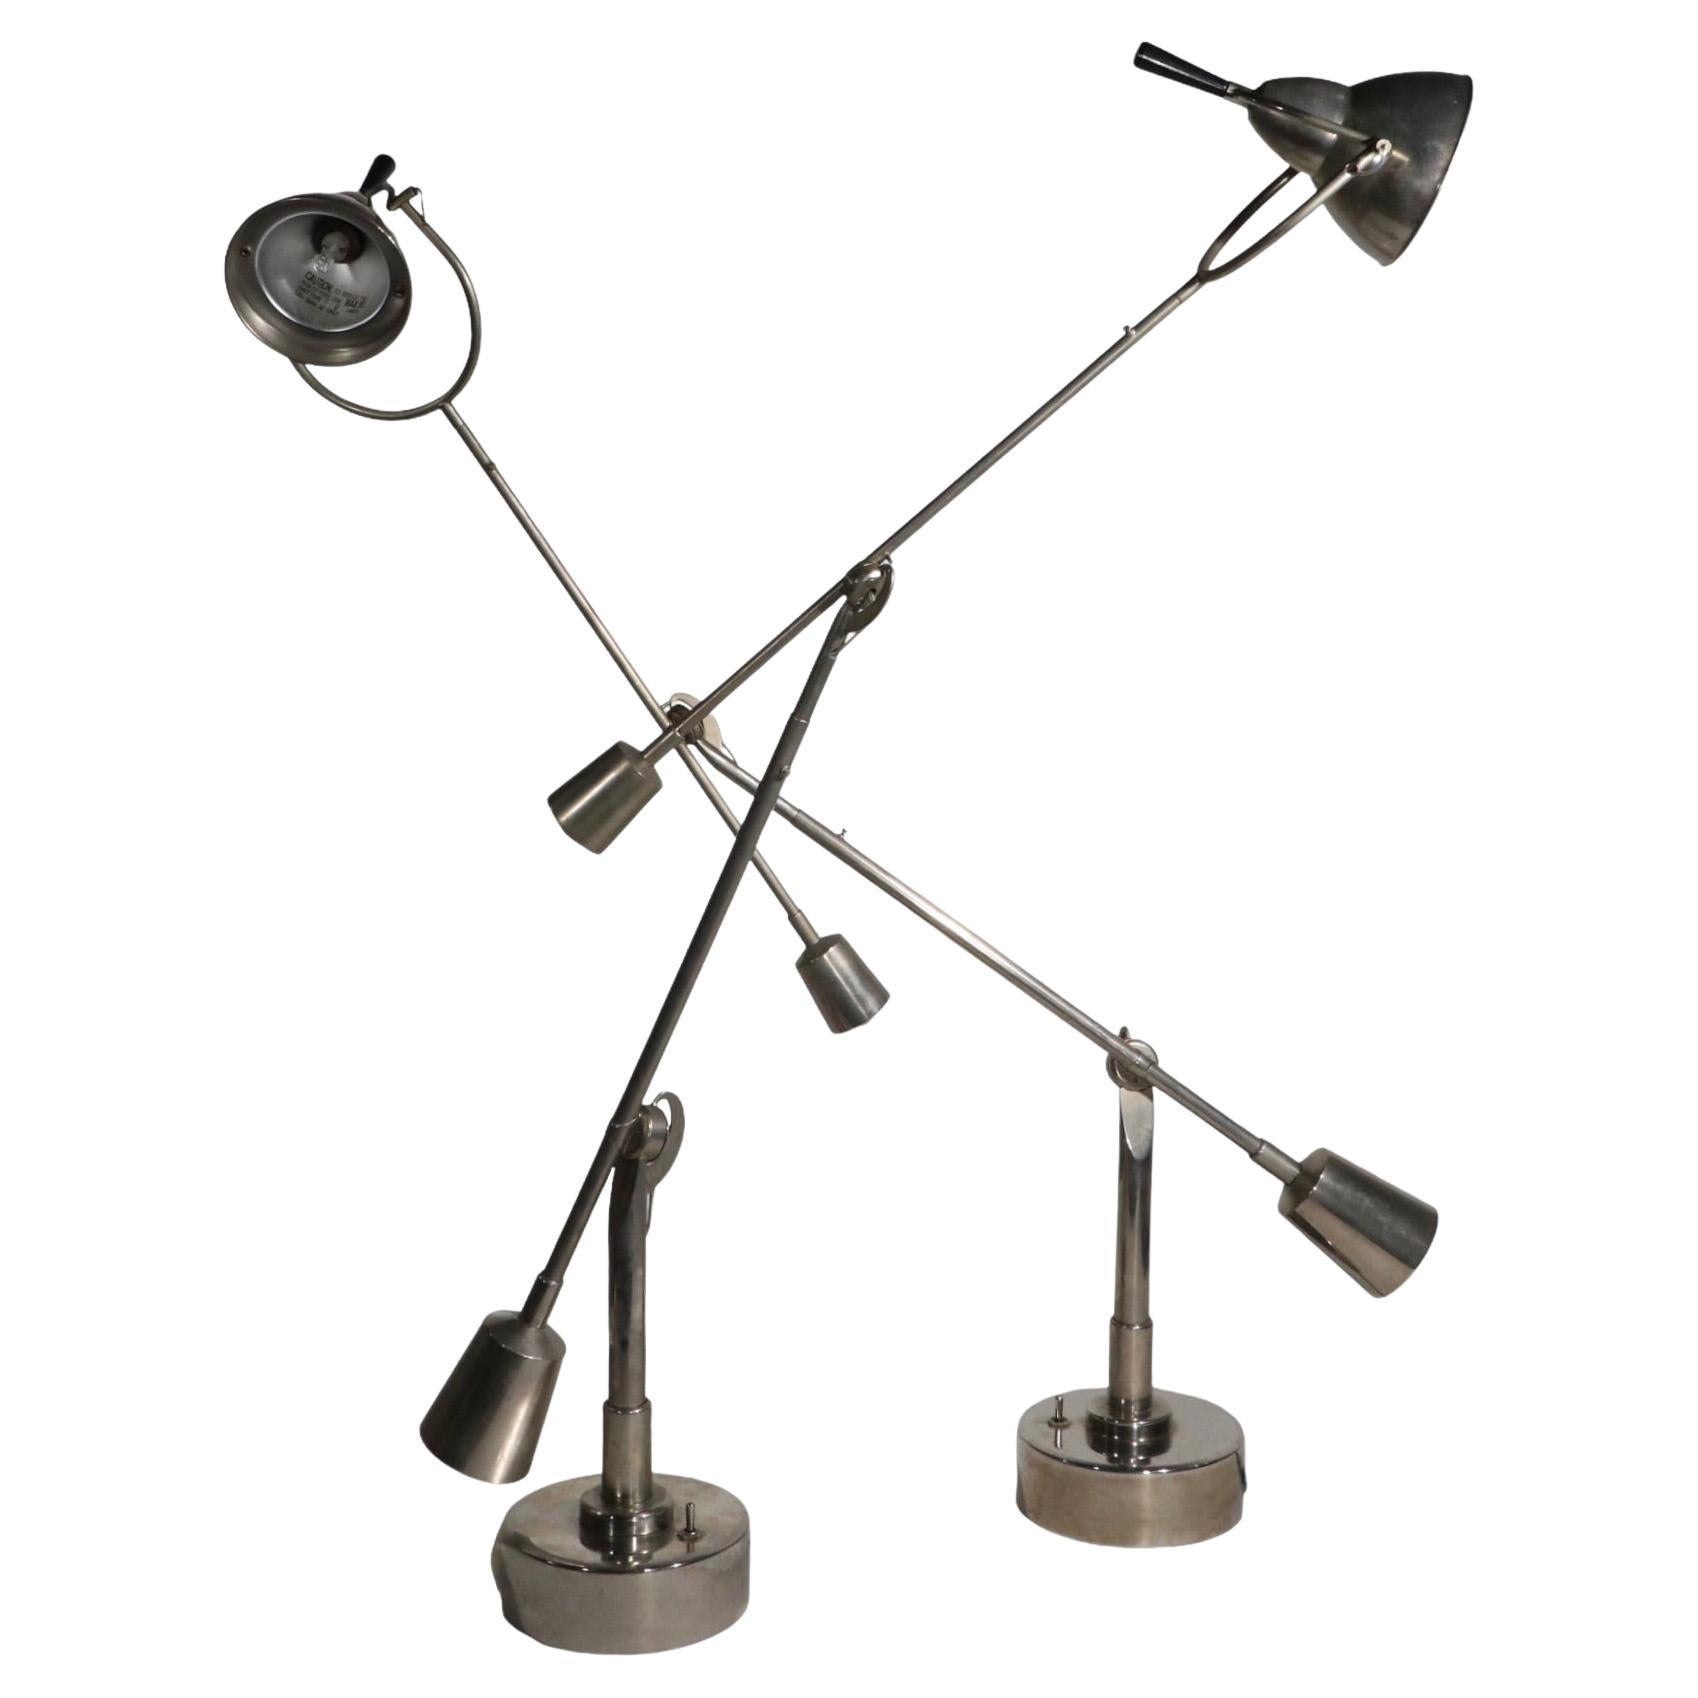 Pair of iconic articulating desk, table lamps, originally designed in the 1920's by Edouard Wilfred Buquet, this example is circa 1990's. The lamps feature two arms, which are fully jointed, and the hood shade swivels and tilts to position the